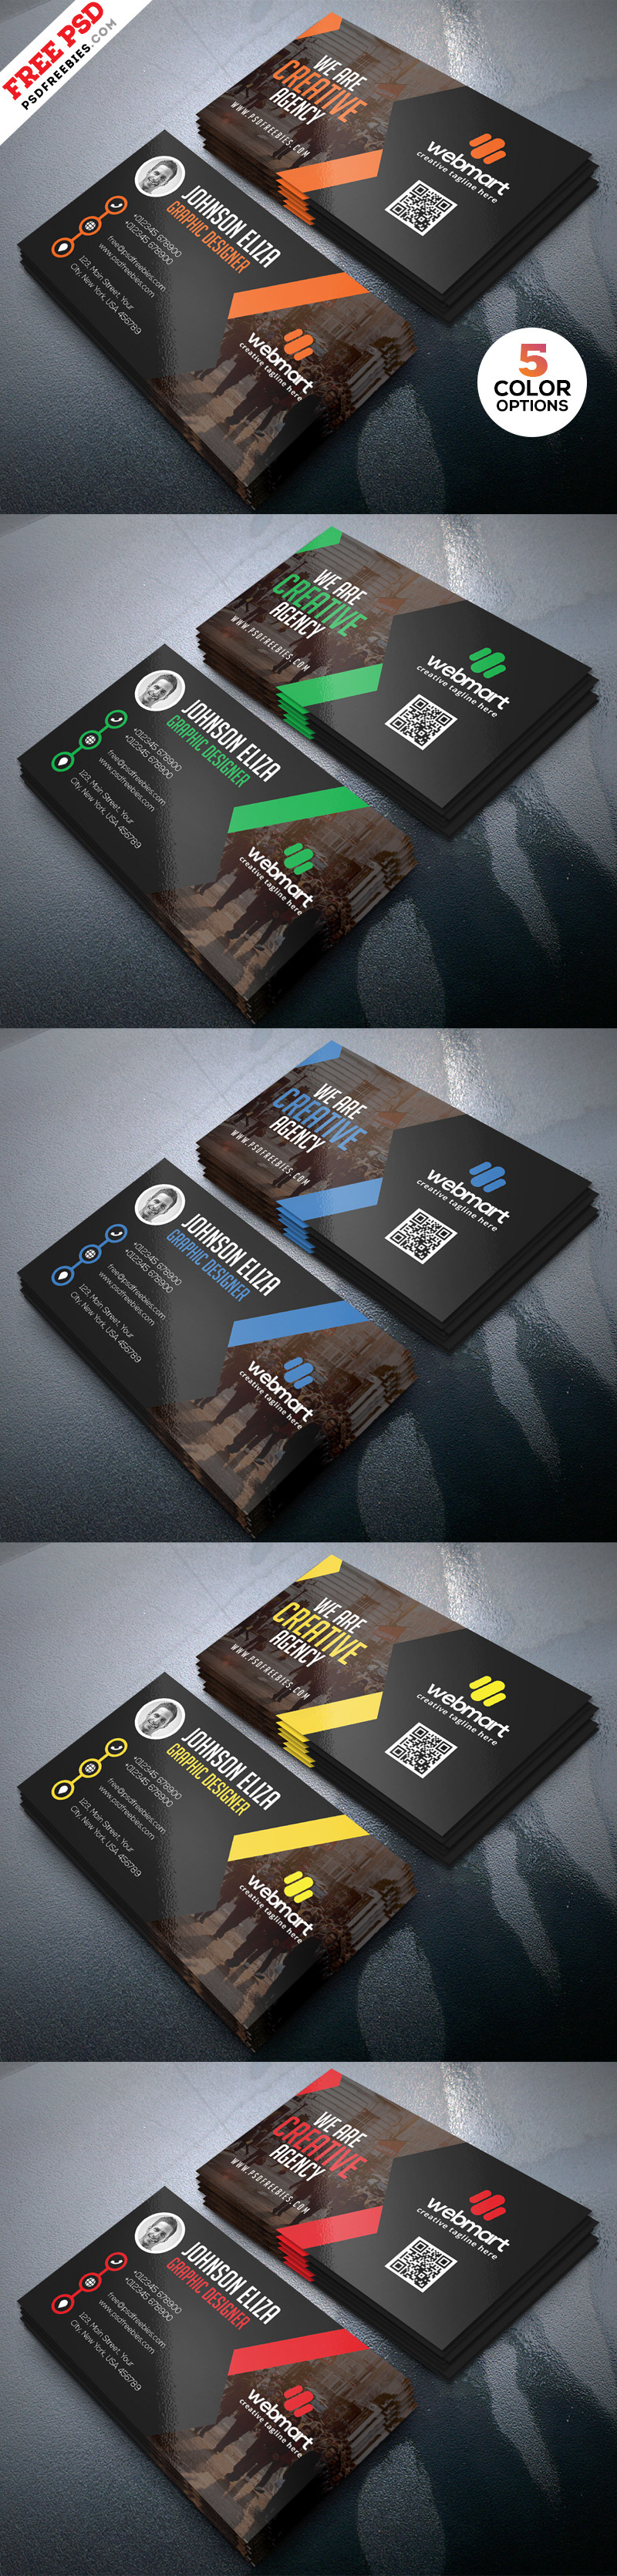 free psd business card Business Cards psd template psd photoshop Coporate card free design Free Template creative